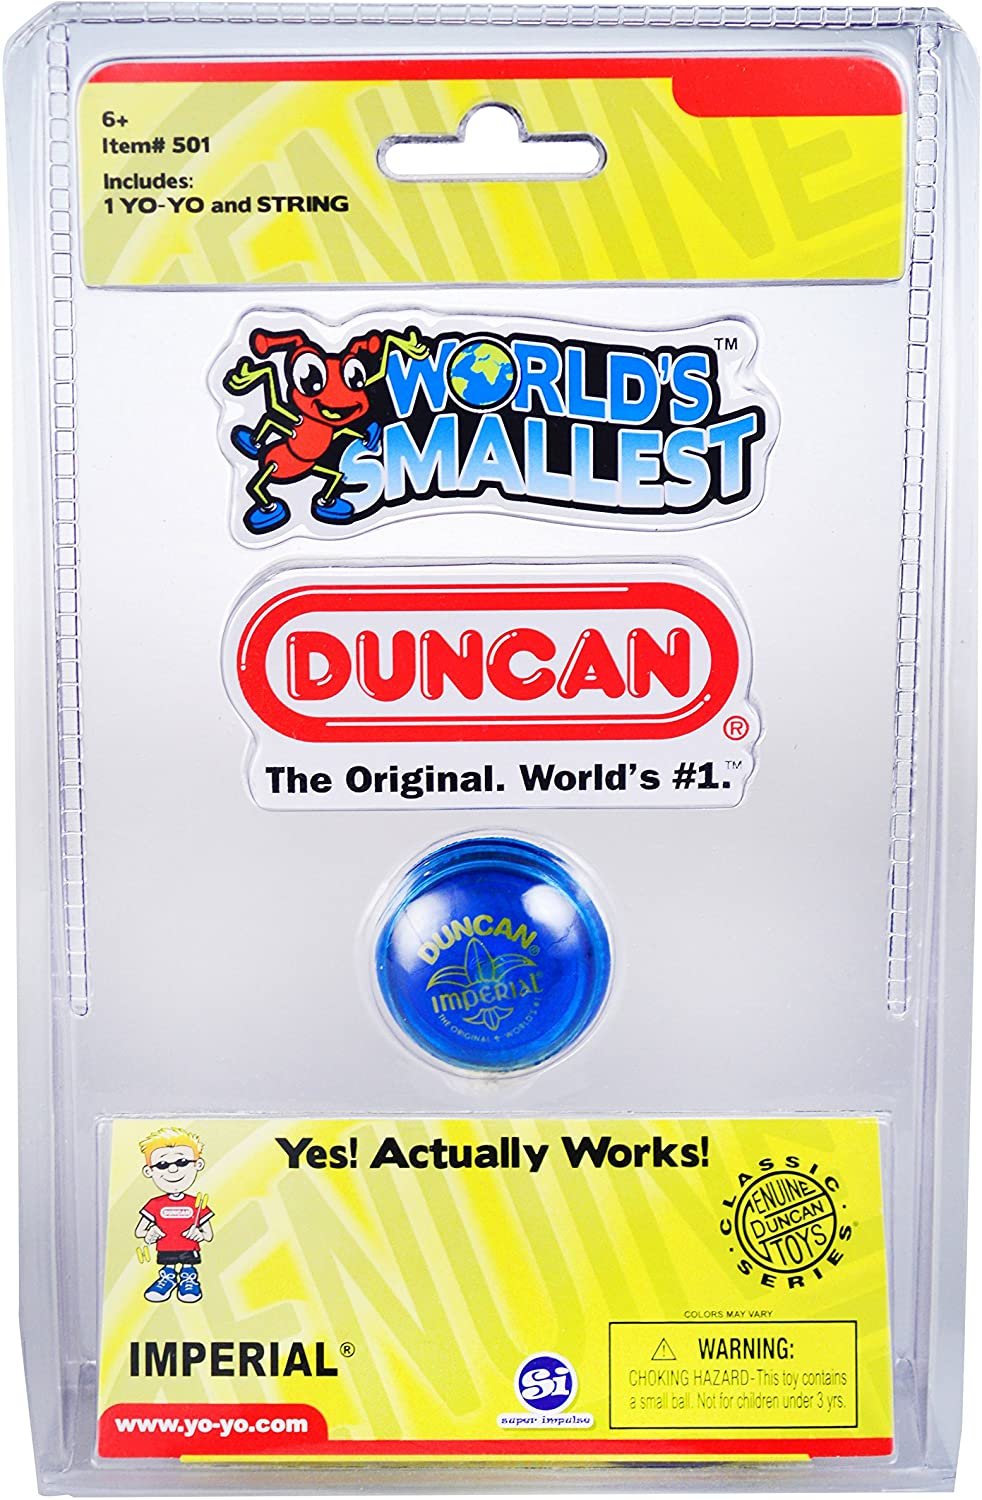 World's Smallest Duncan Imperial Yoyo